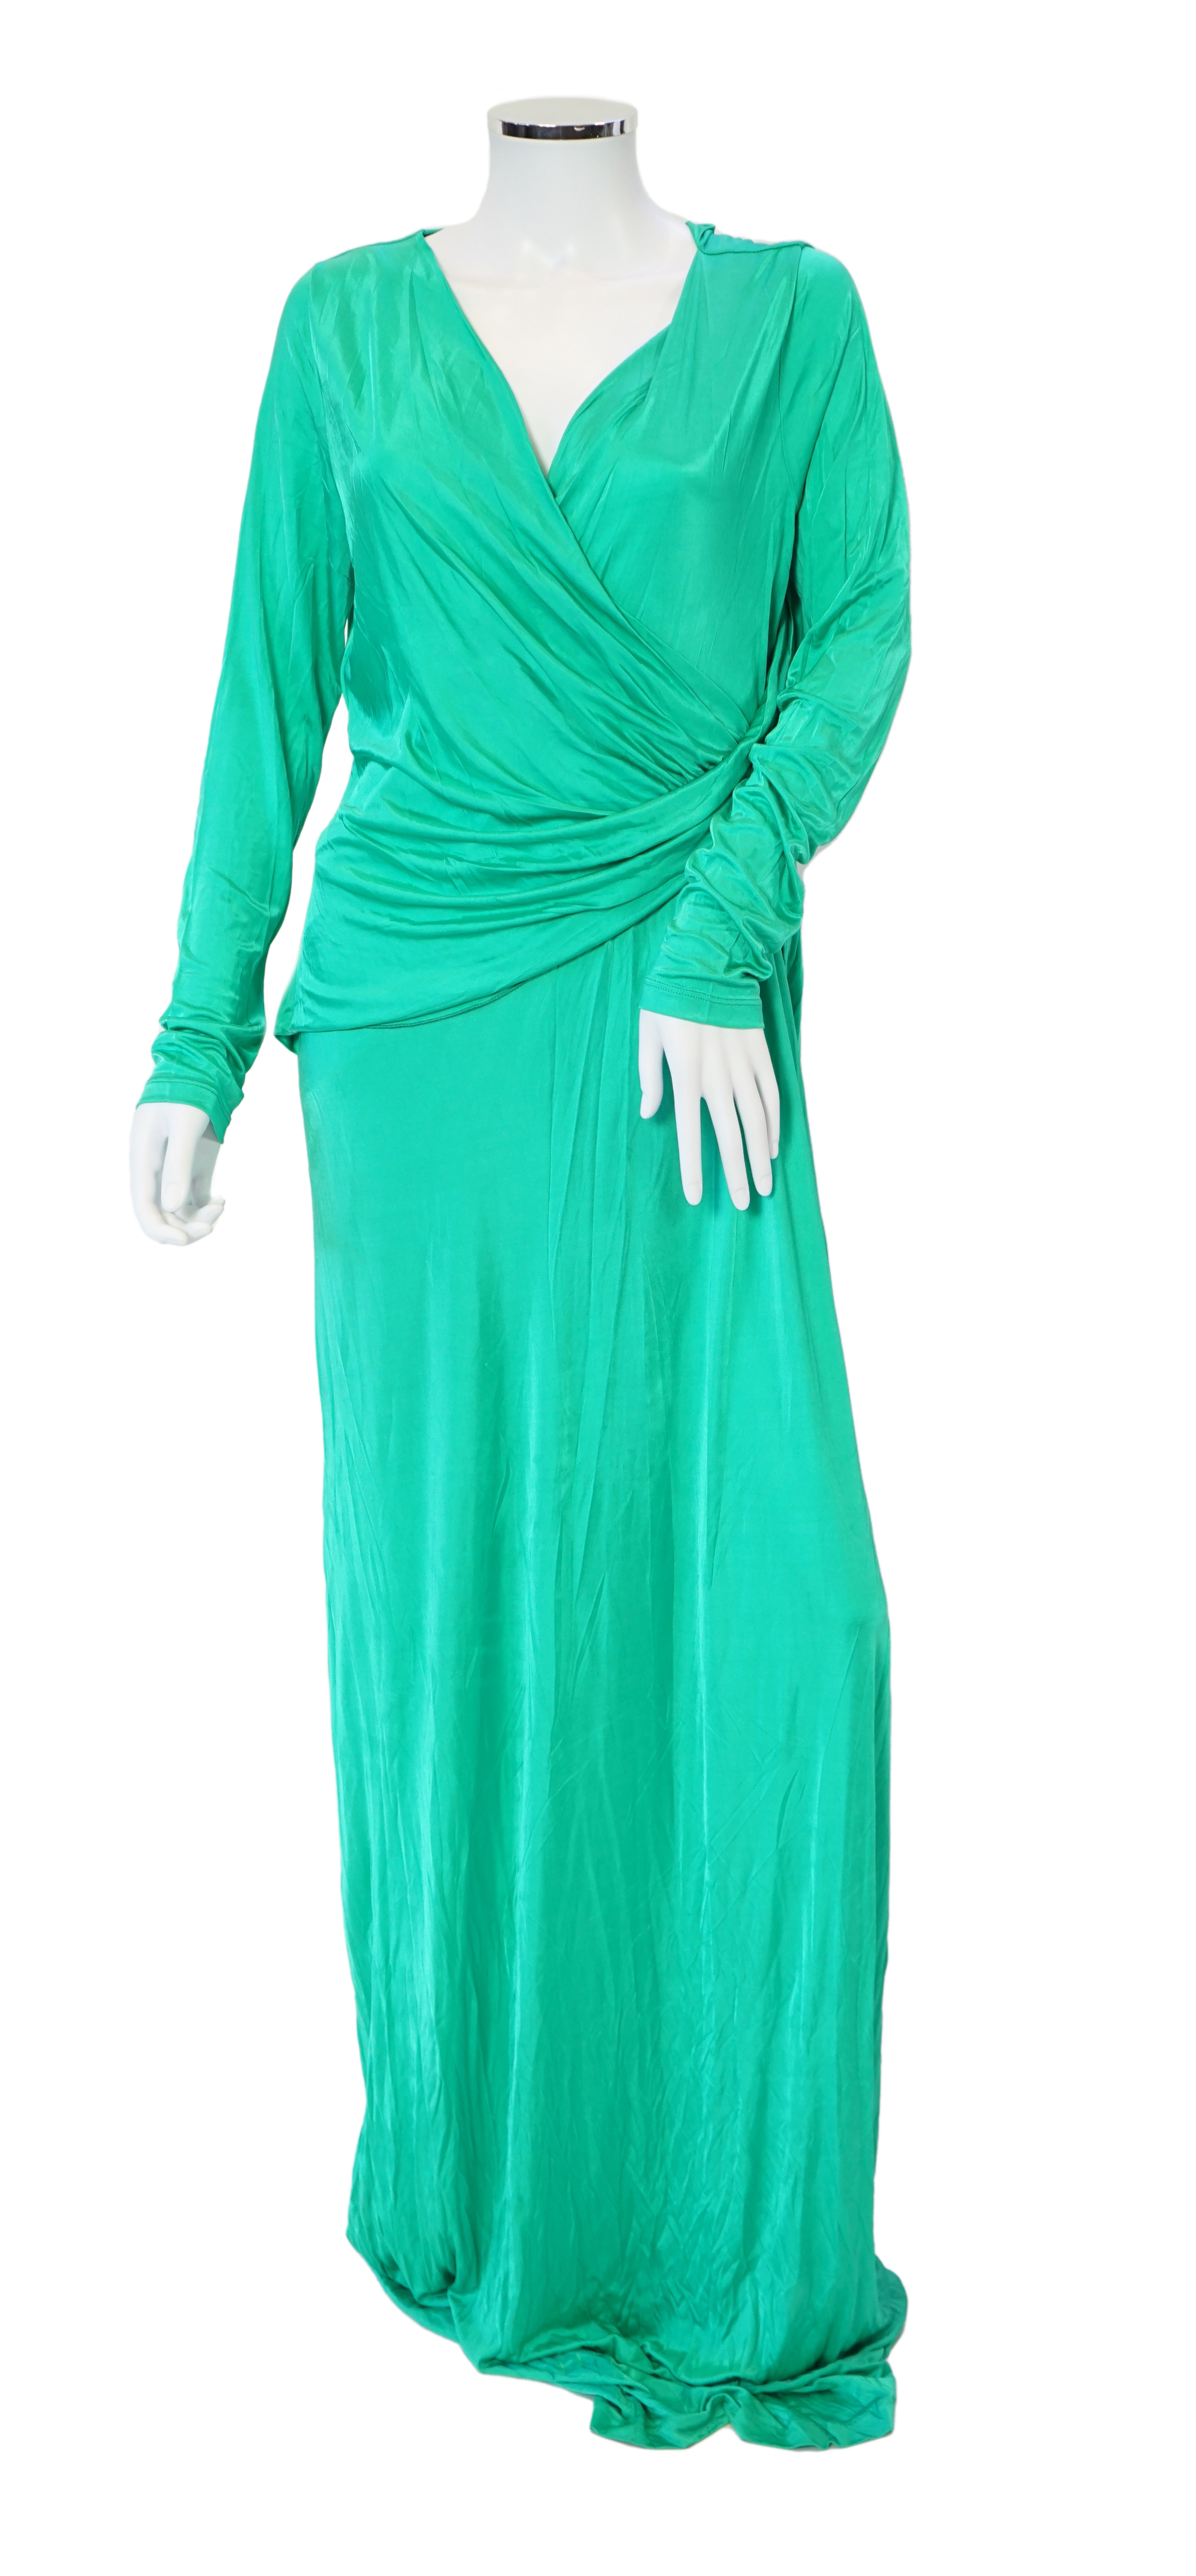 A Versace Collection green long dress and gold and yellow biker style jacket, dress size 52 and jacket size Medium